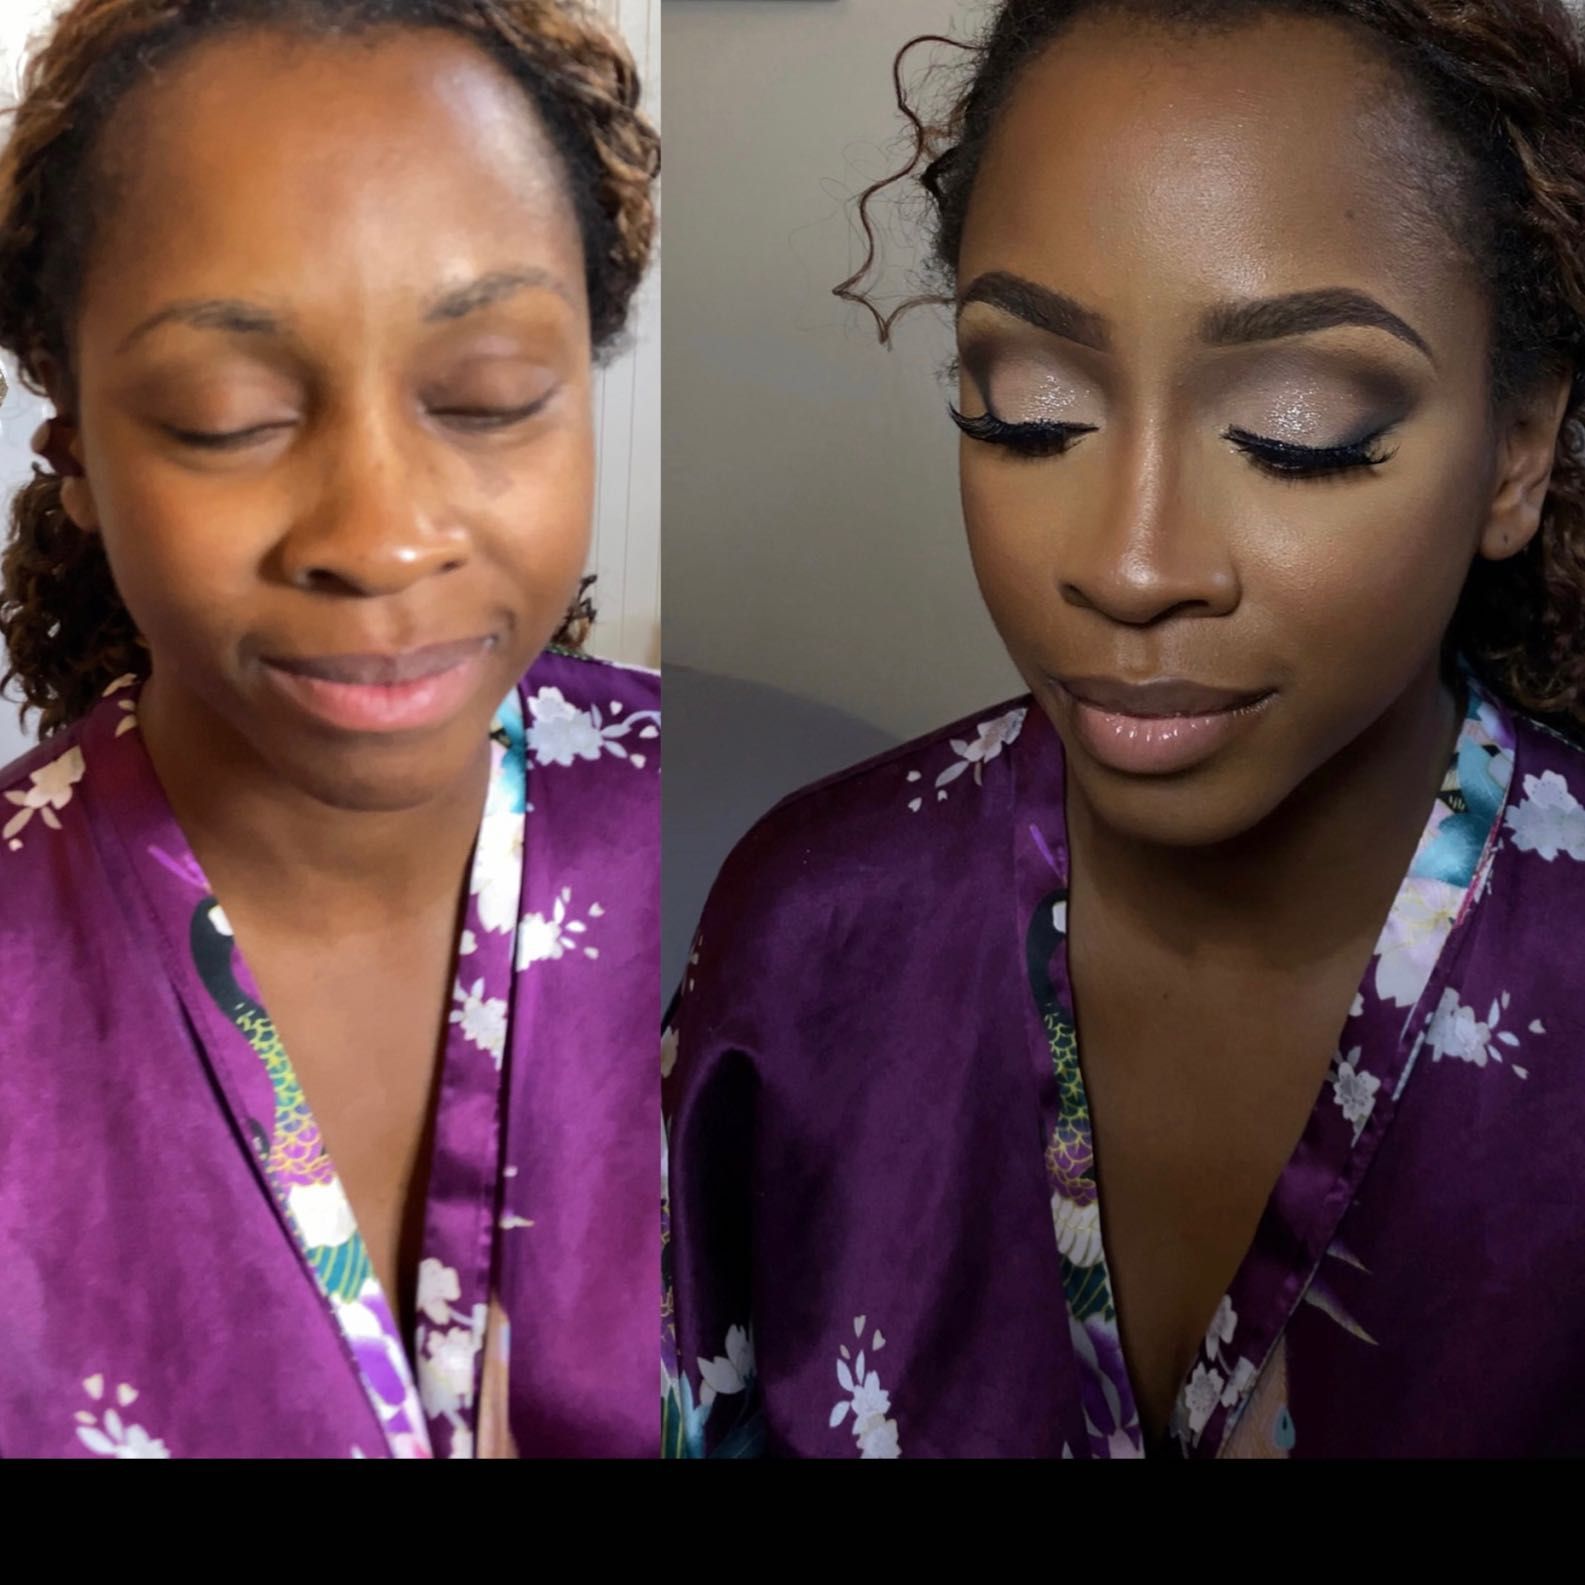 🔥 Special Sale ! Sultry Soft Glam, Full Face Beat portfolio